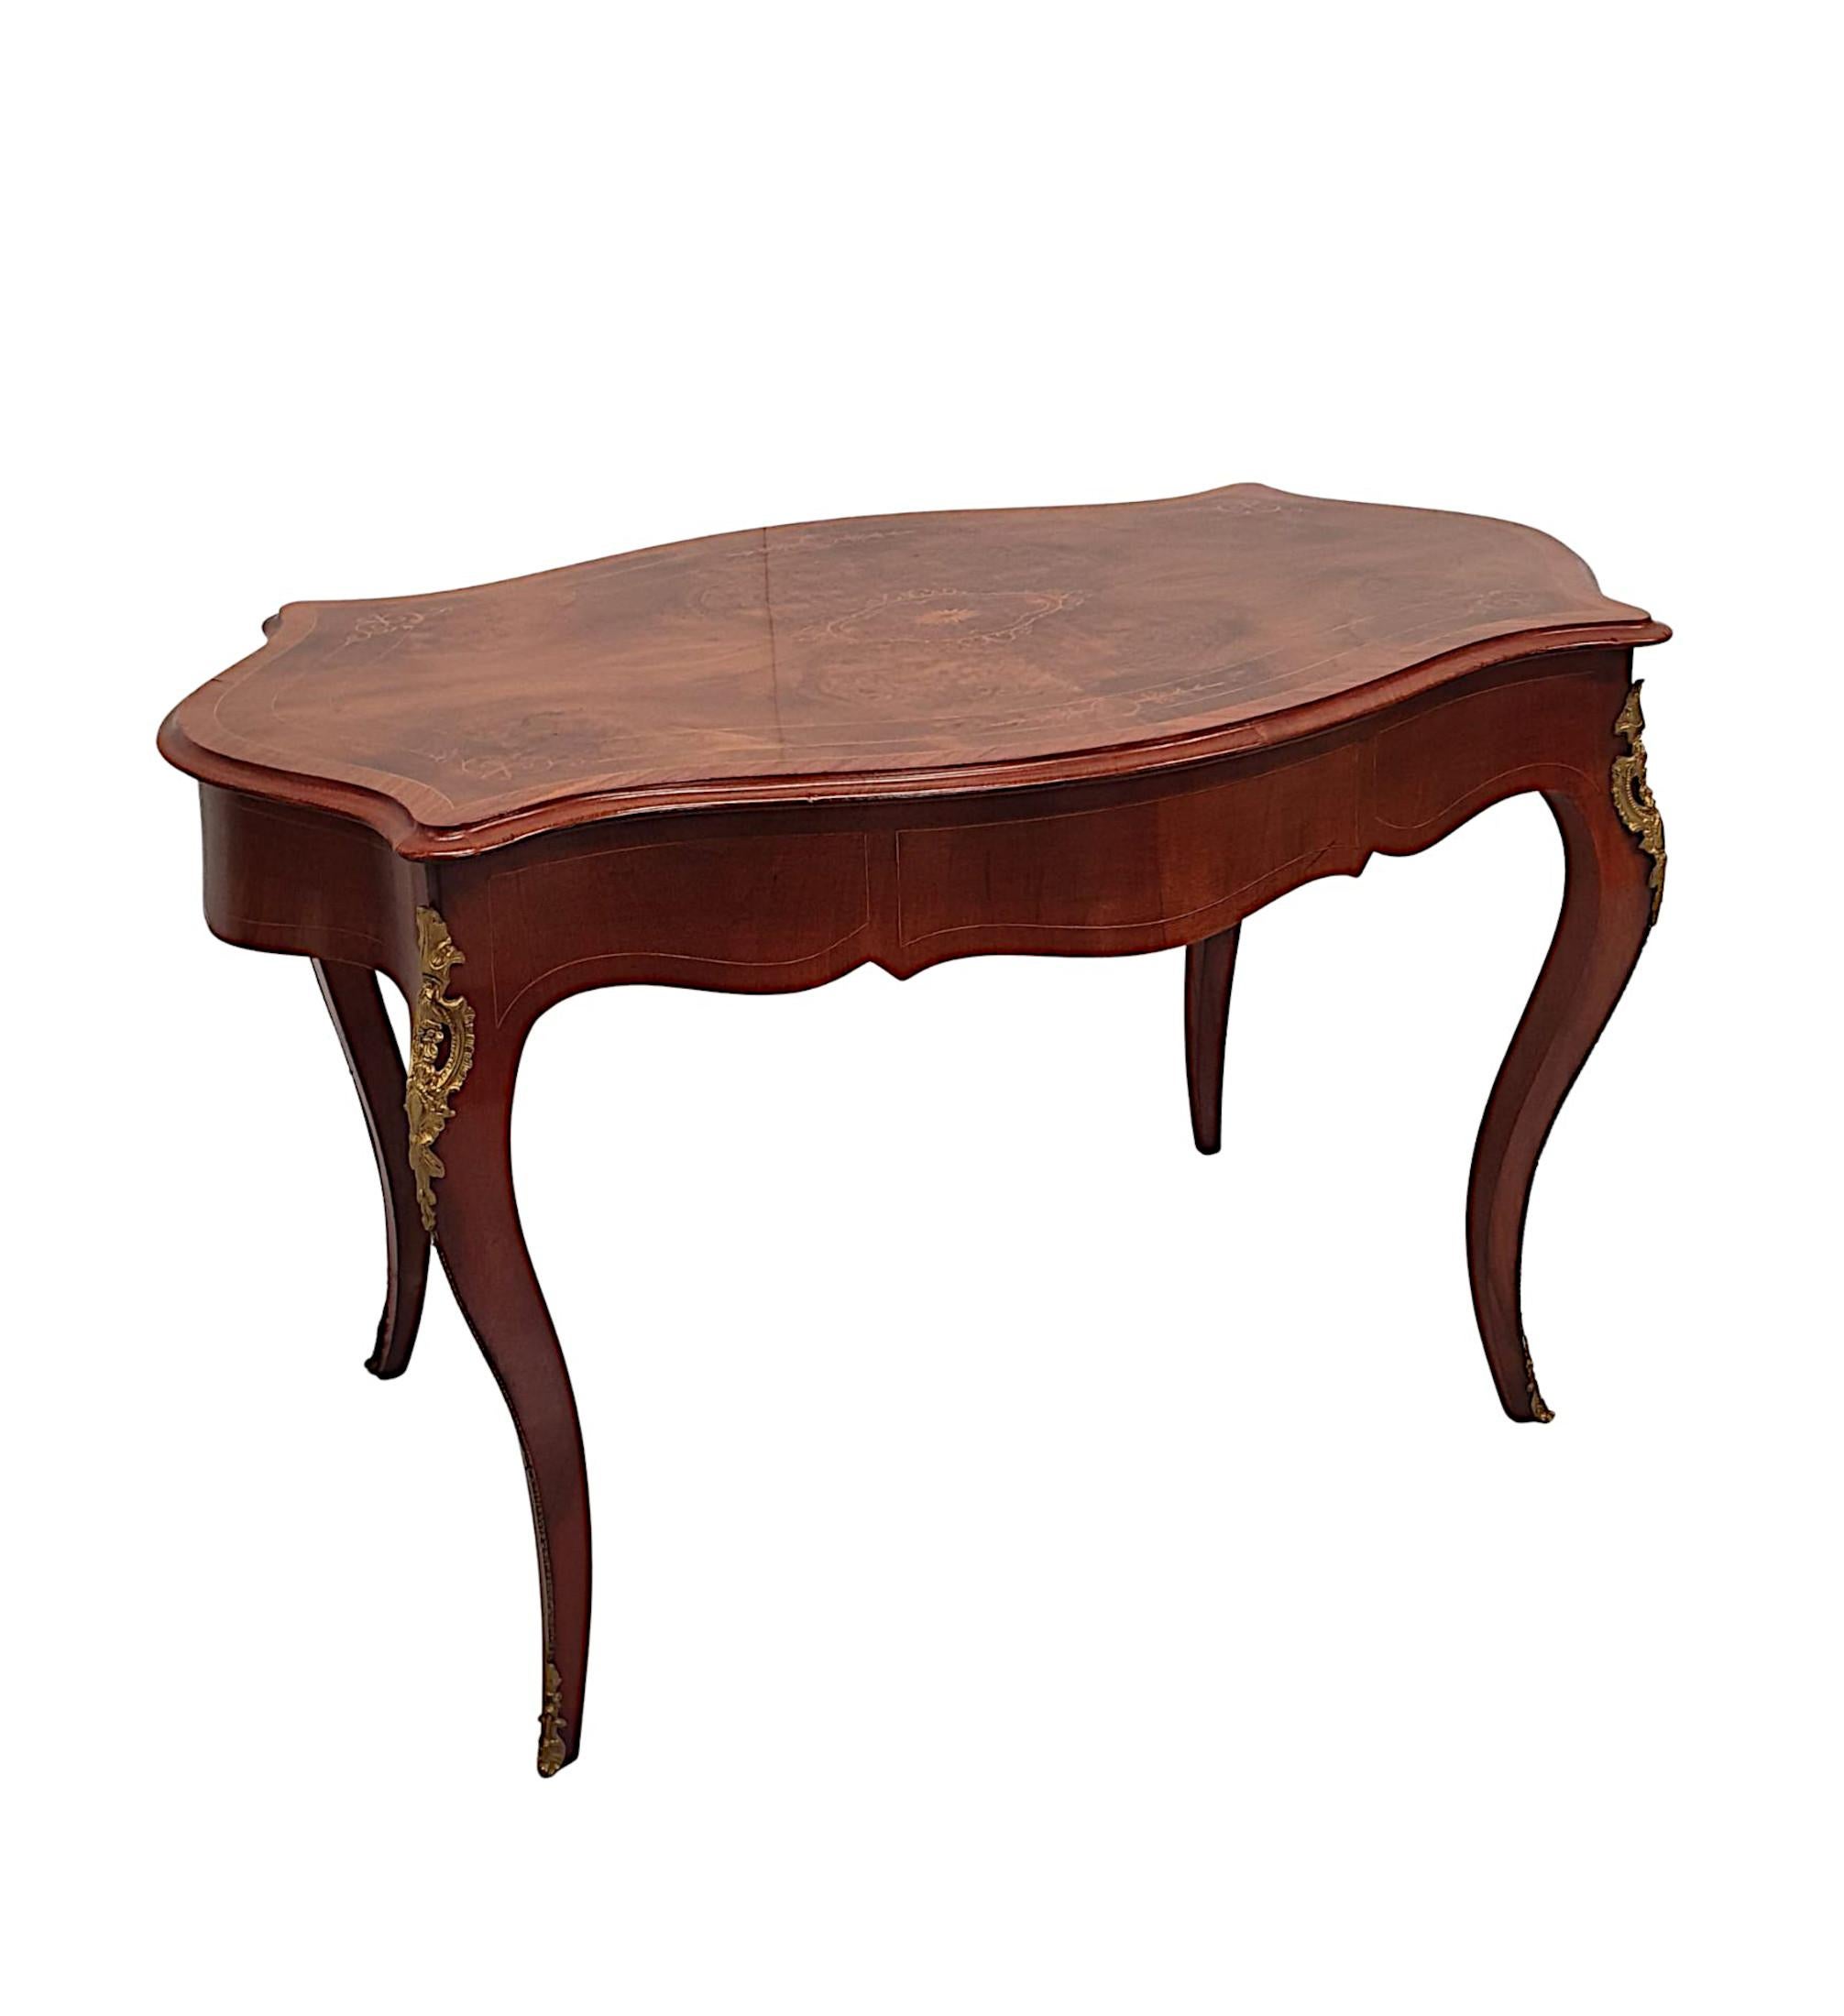 A fabulous 19th century burr walnut side table or desk of gorgeous quality, finely hand carved, ormolu mounted and line inlaid throughout with beautifully rich patination and fine grain. The moulded, crossbanded and line inlaid top of serpentine